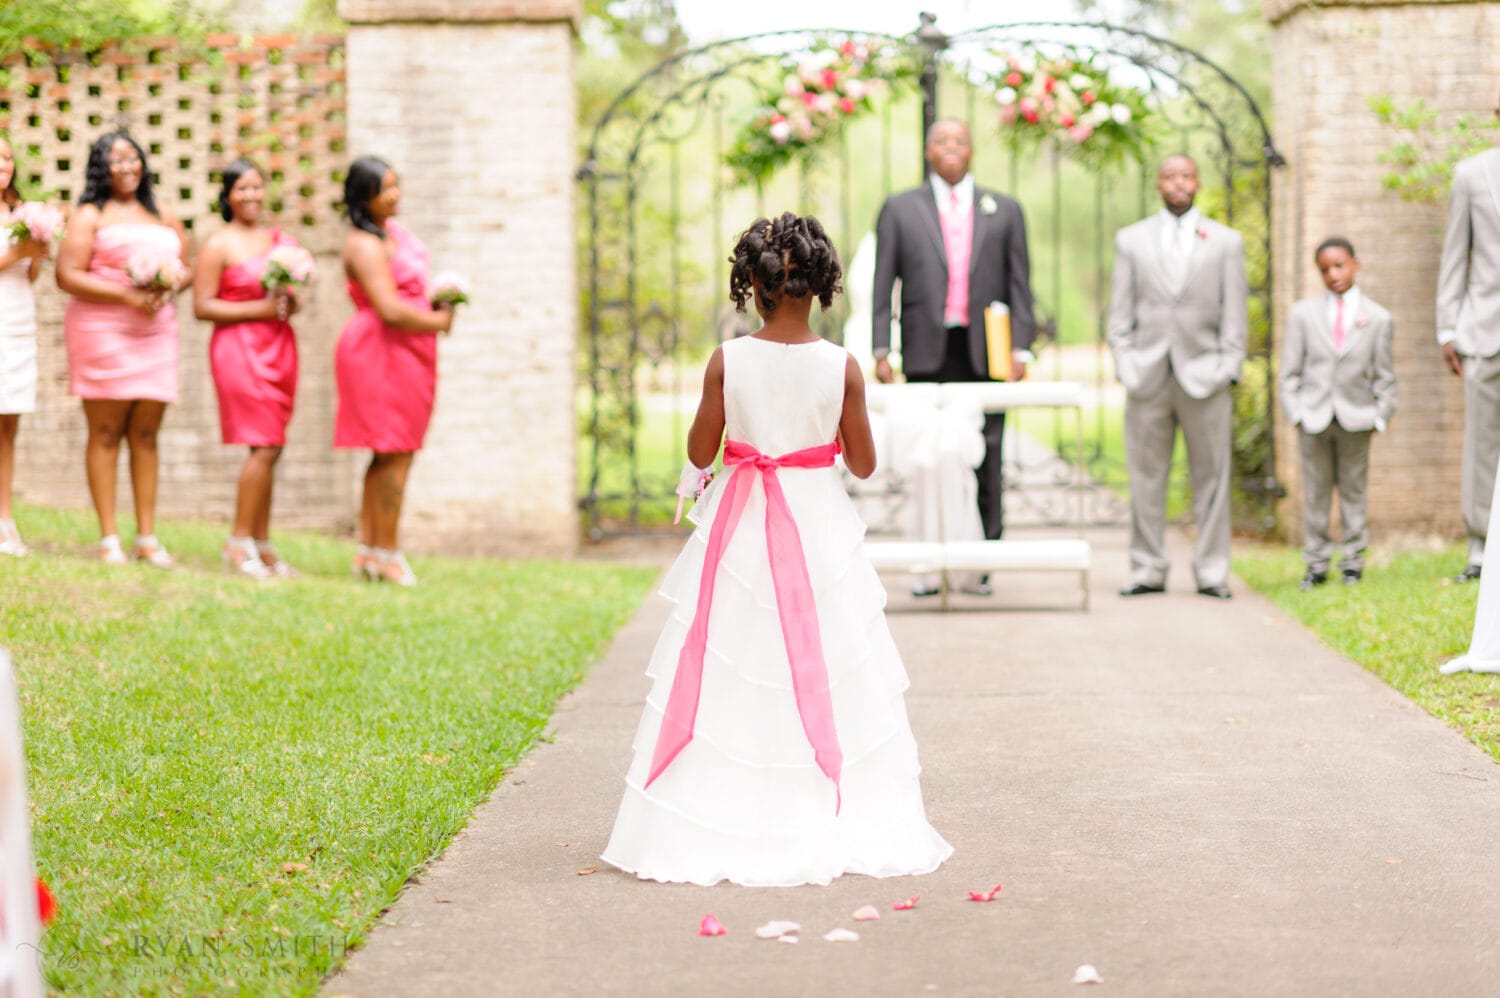 Wedding ceremony by the wrought iron gates on the Oak Allee  - Brookgreen Gardens, Murrells Inlet, SC